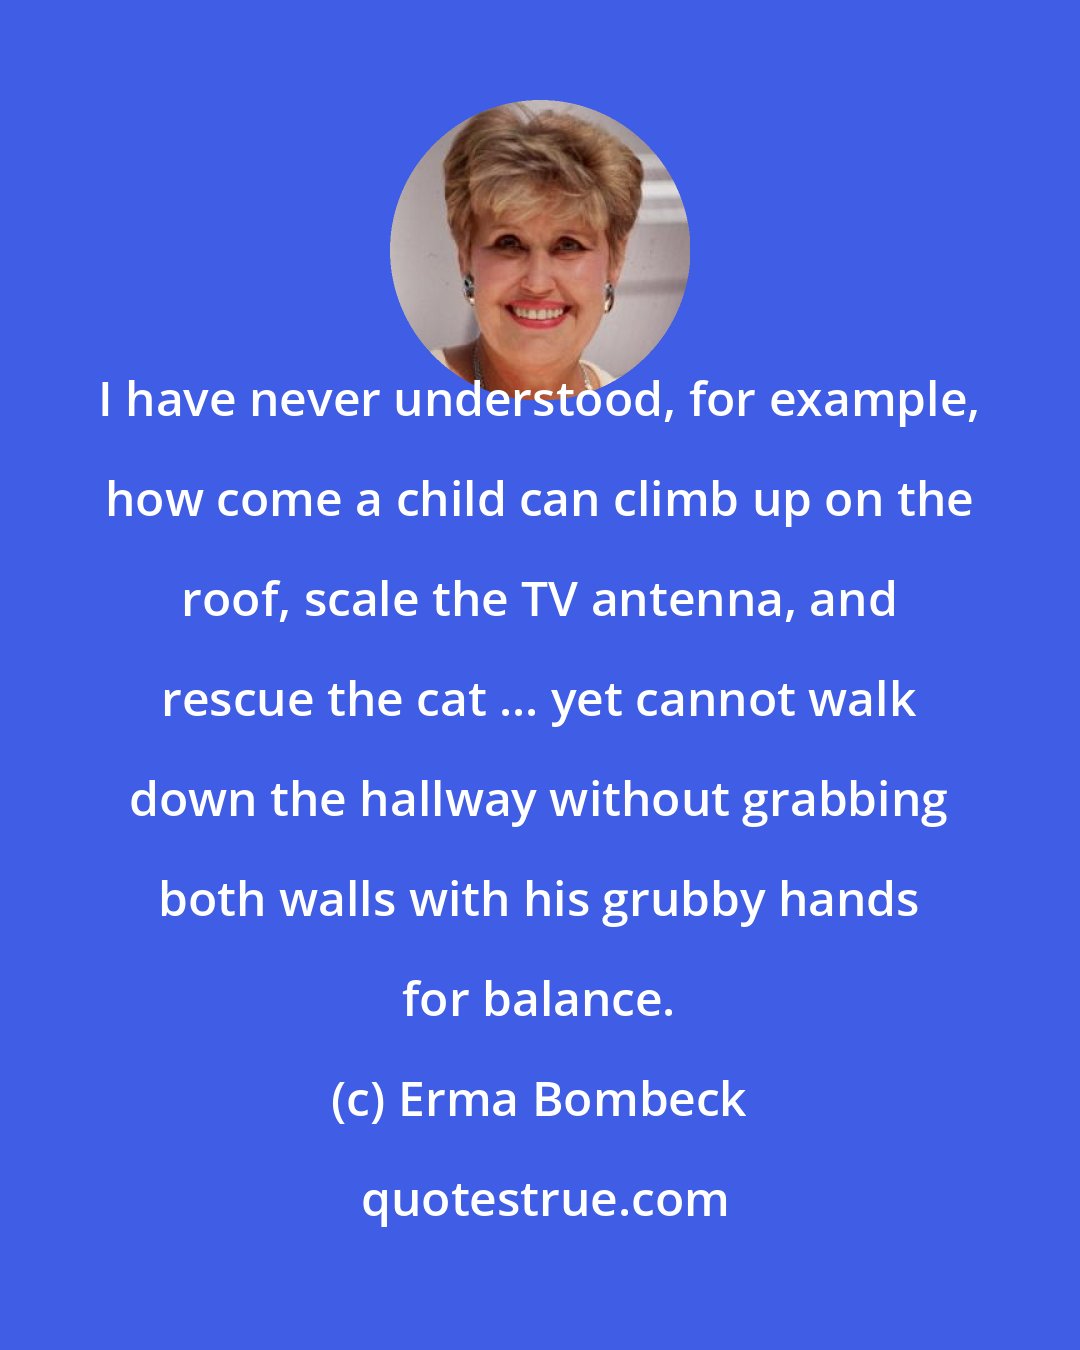 Erma Bombeck: I have never understood, for example, how come a child can climb up on the roof, scale the TV antenna, and rescue the cat ... yet cannot walk down the hallway without grabbing both walls with his grubby hands for balance.